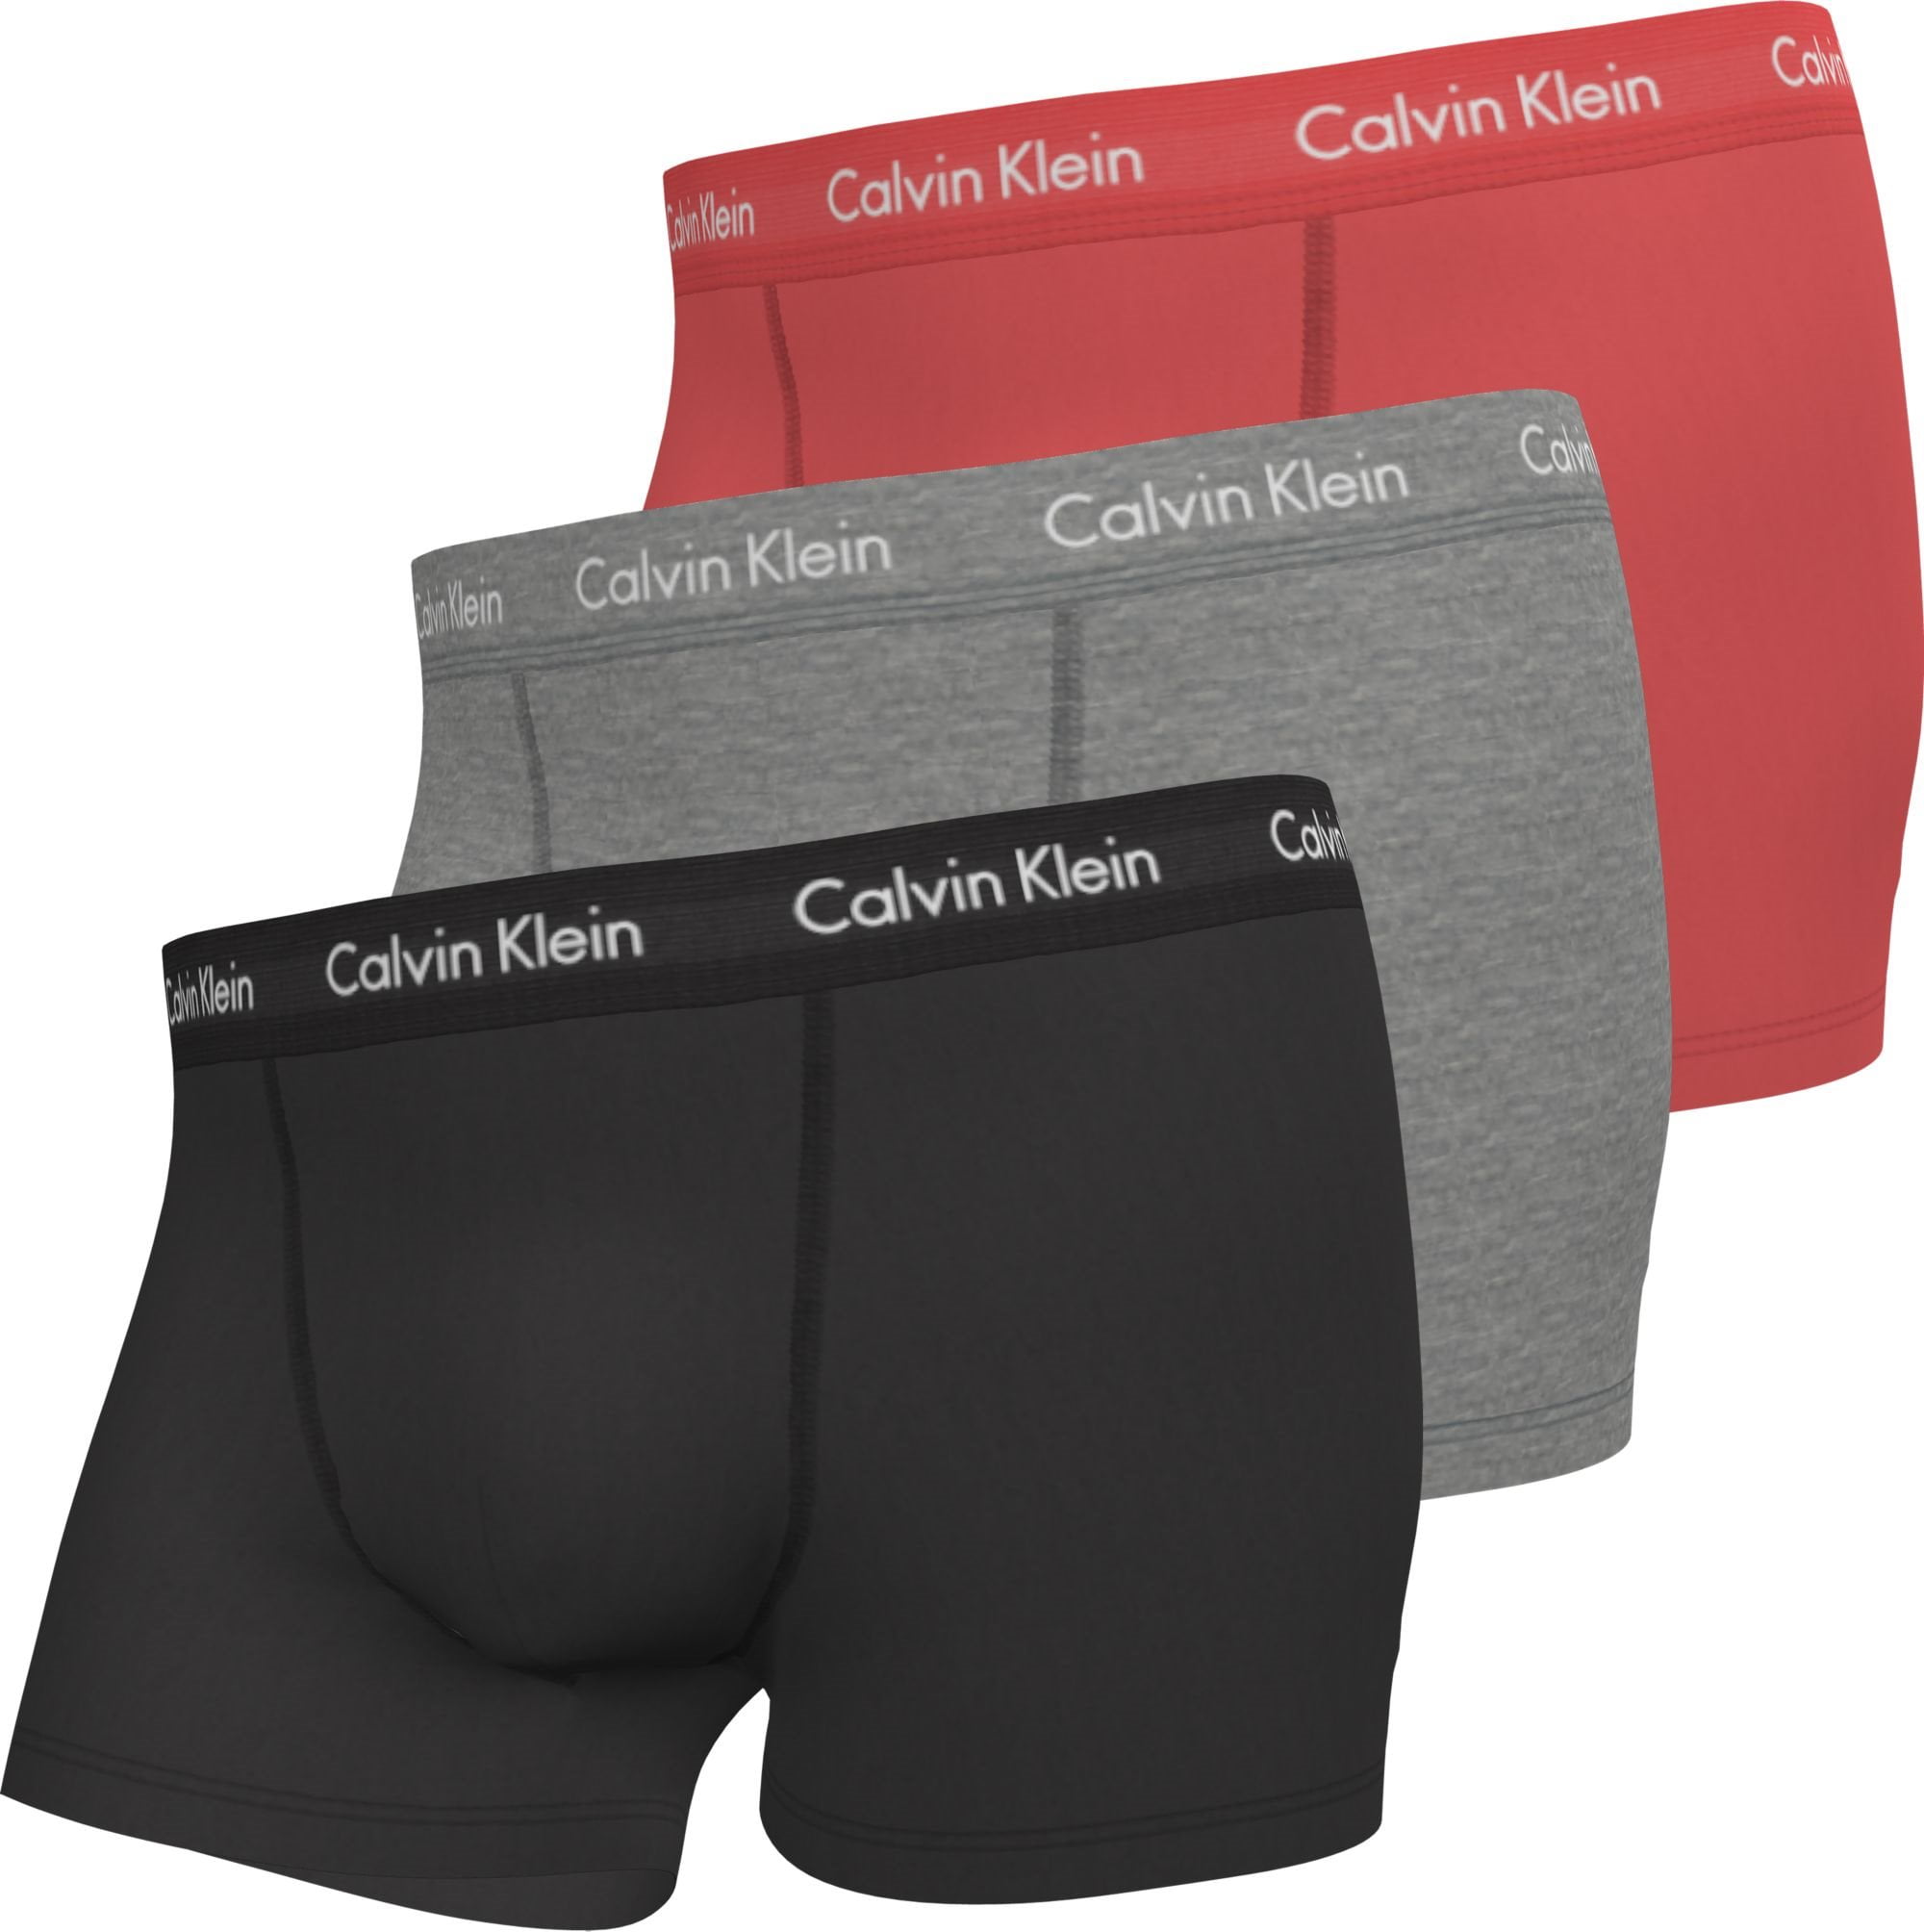 Cotton Stretch 3-PACK Short*